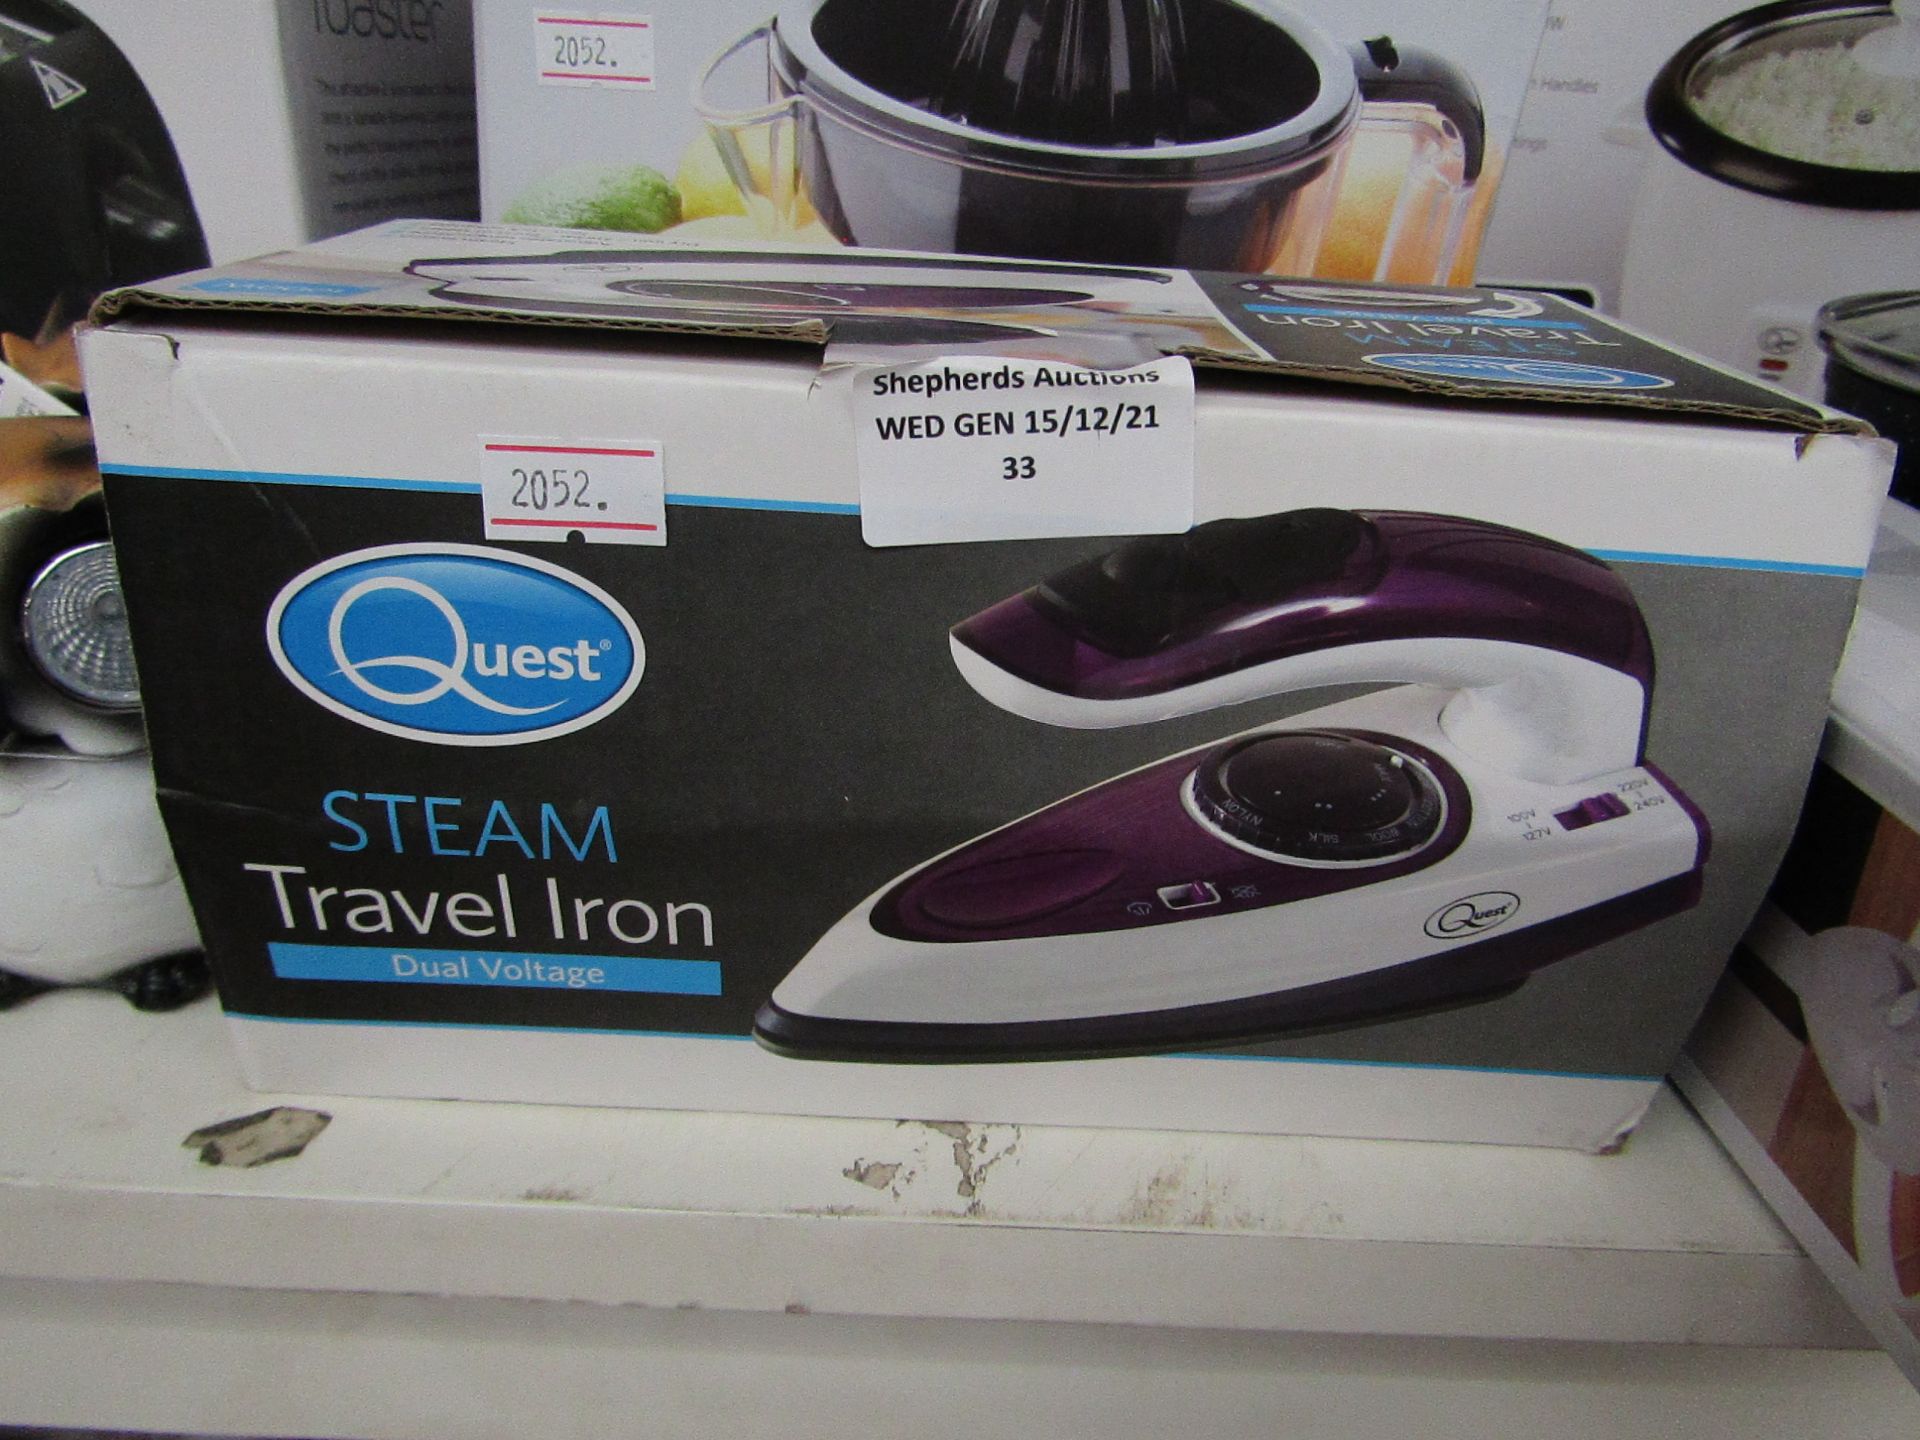 Quest - Steam Travel Iron Dual Voltage - Untested & Boxed.